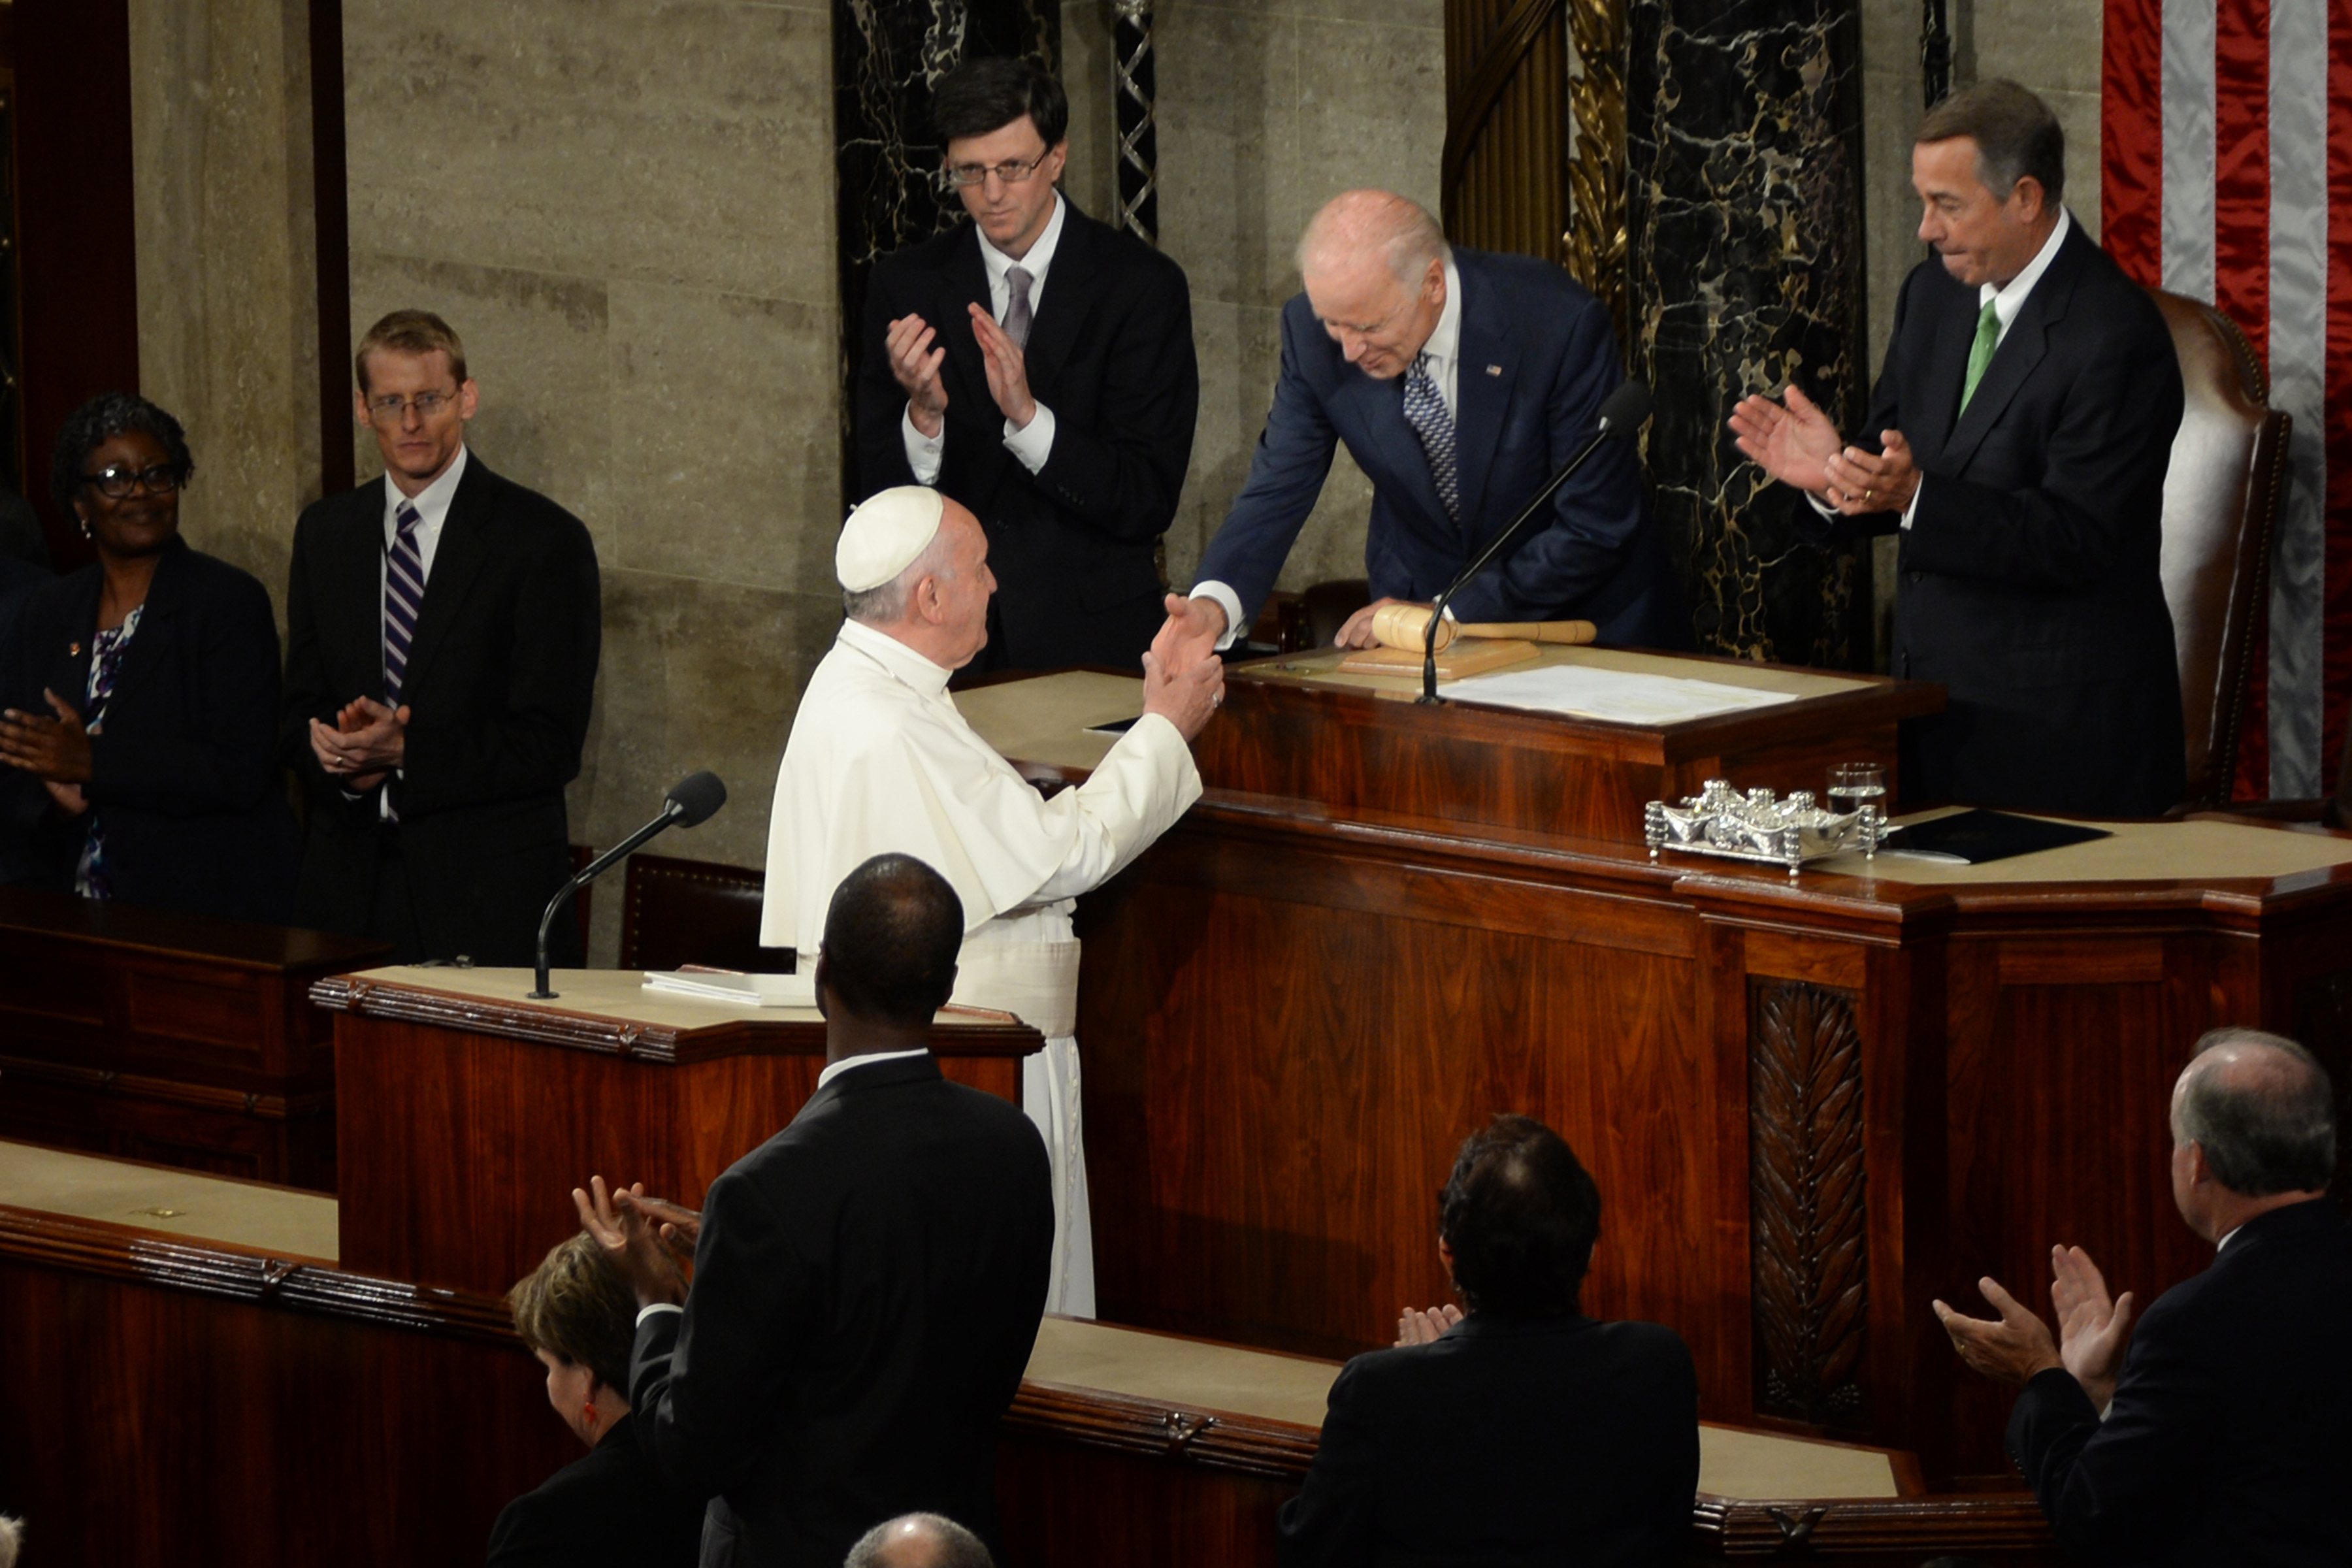 Pope Francis addresses the 114th U.S. Congress for the first time in history.